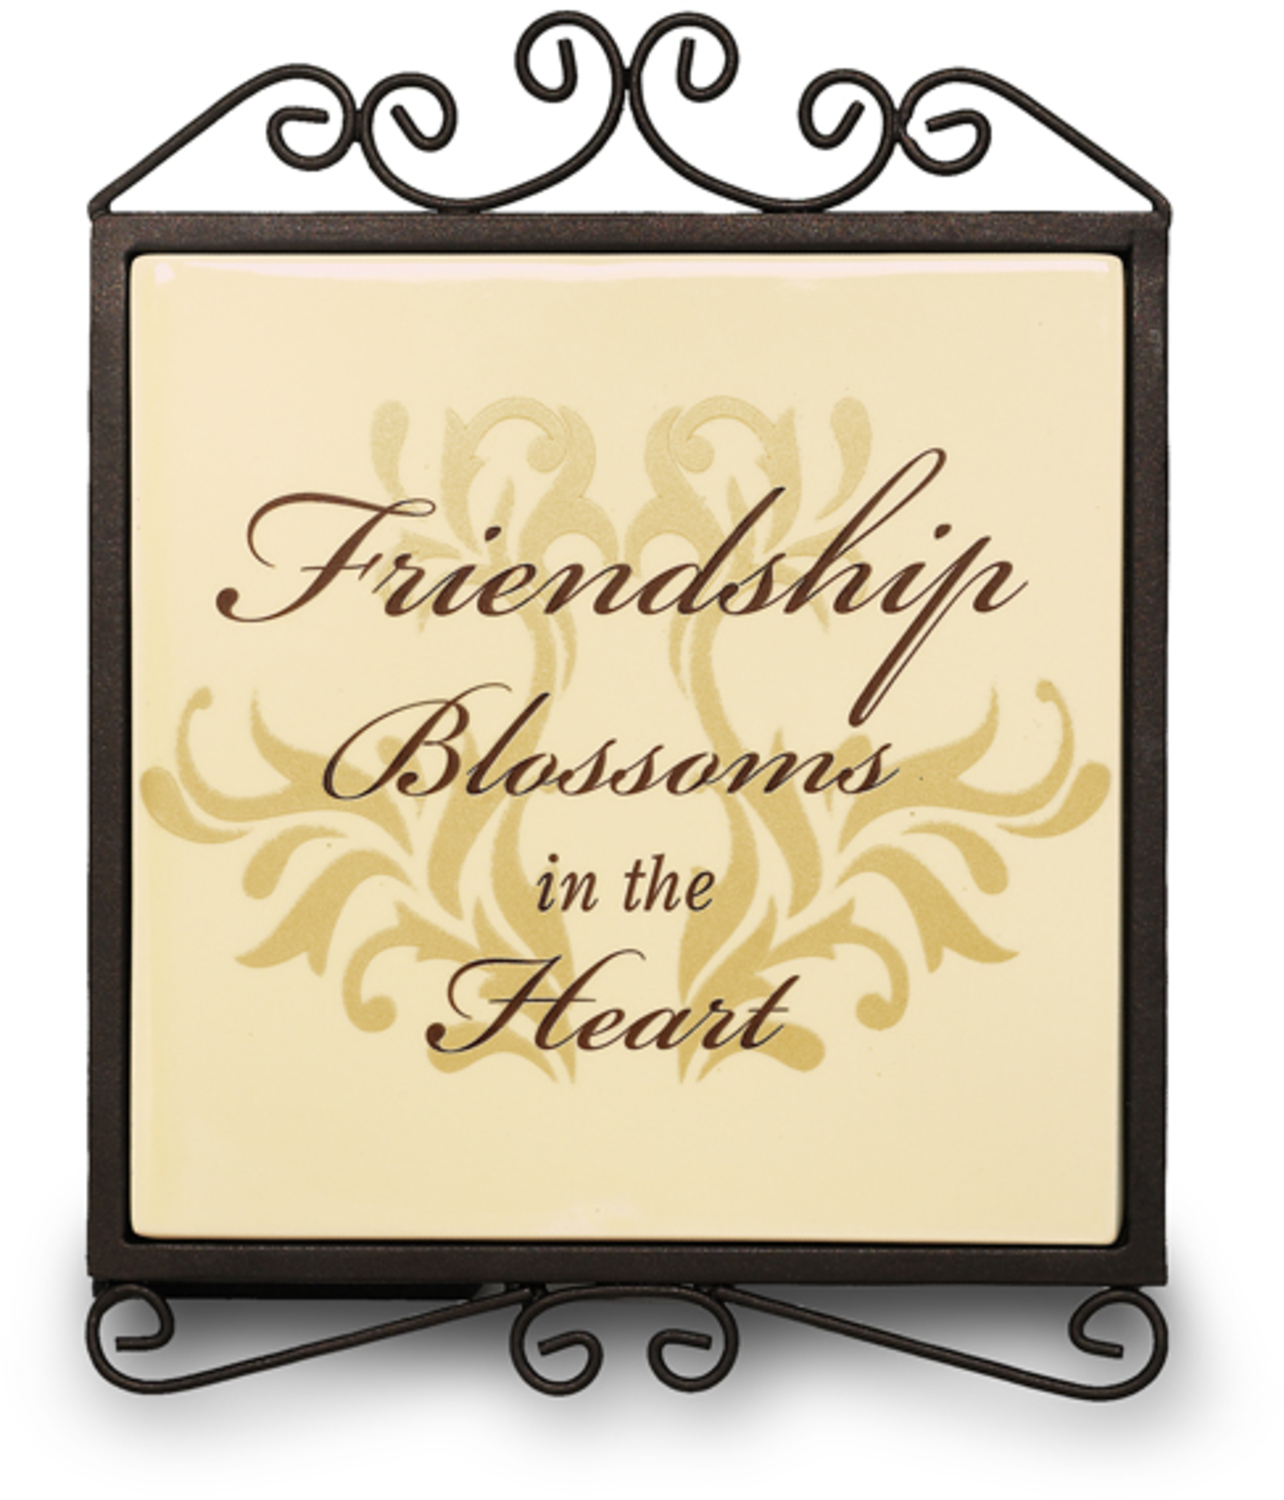 Friendship by Simply Stated - Friendship - 5" x 6.5" Plaque with Metal Scroll